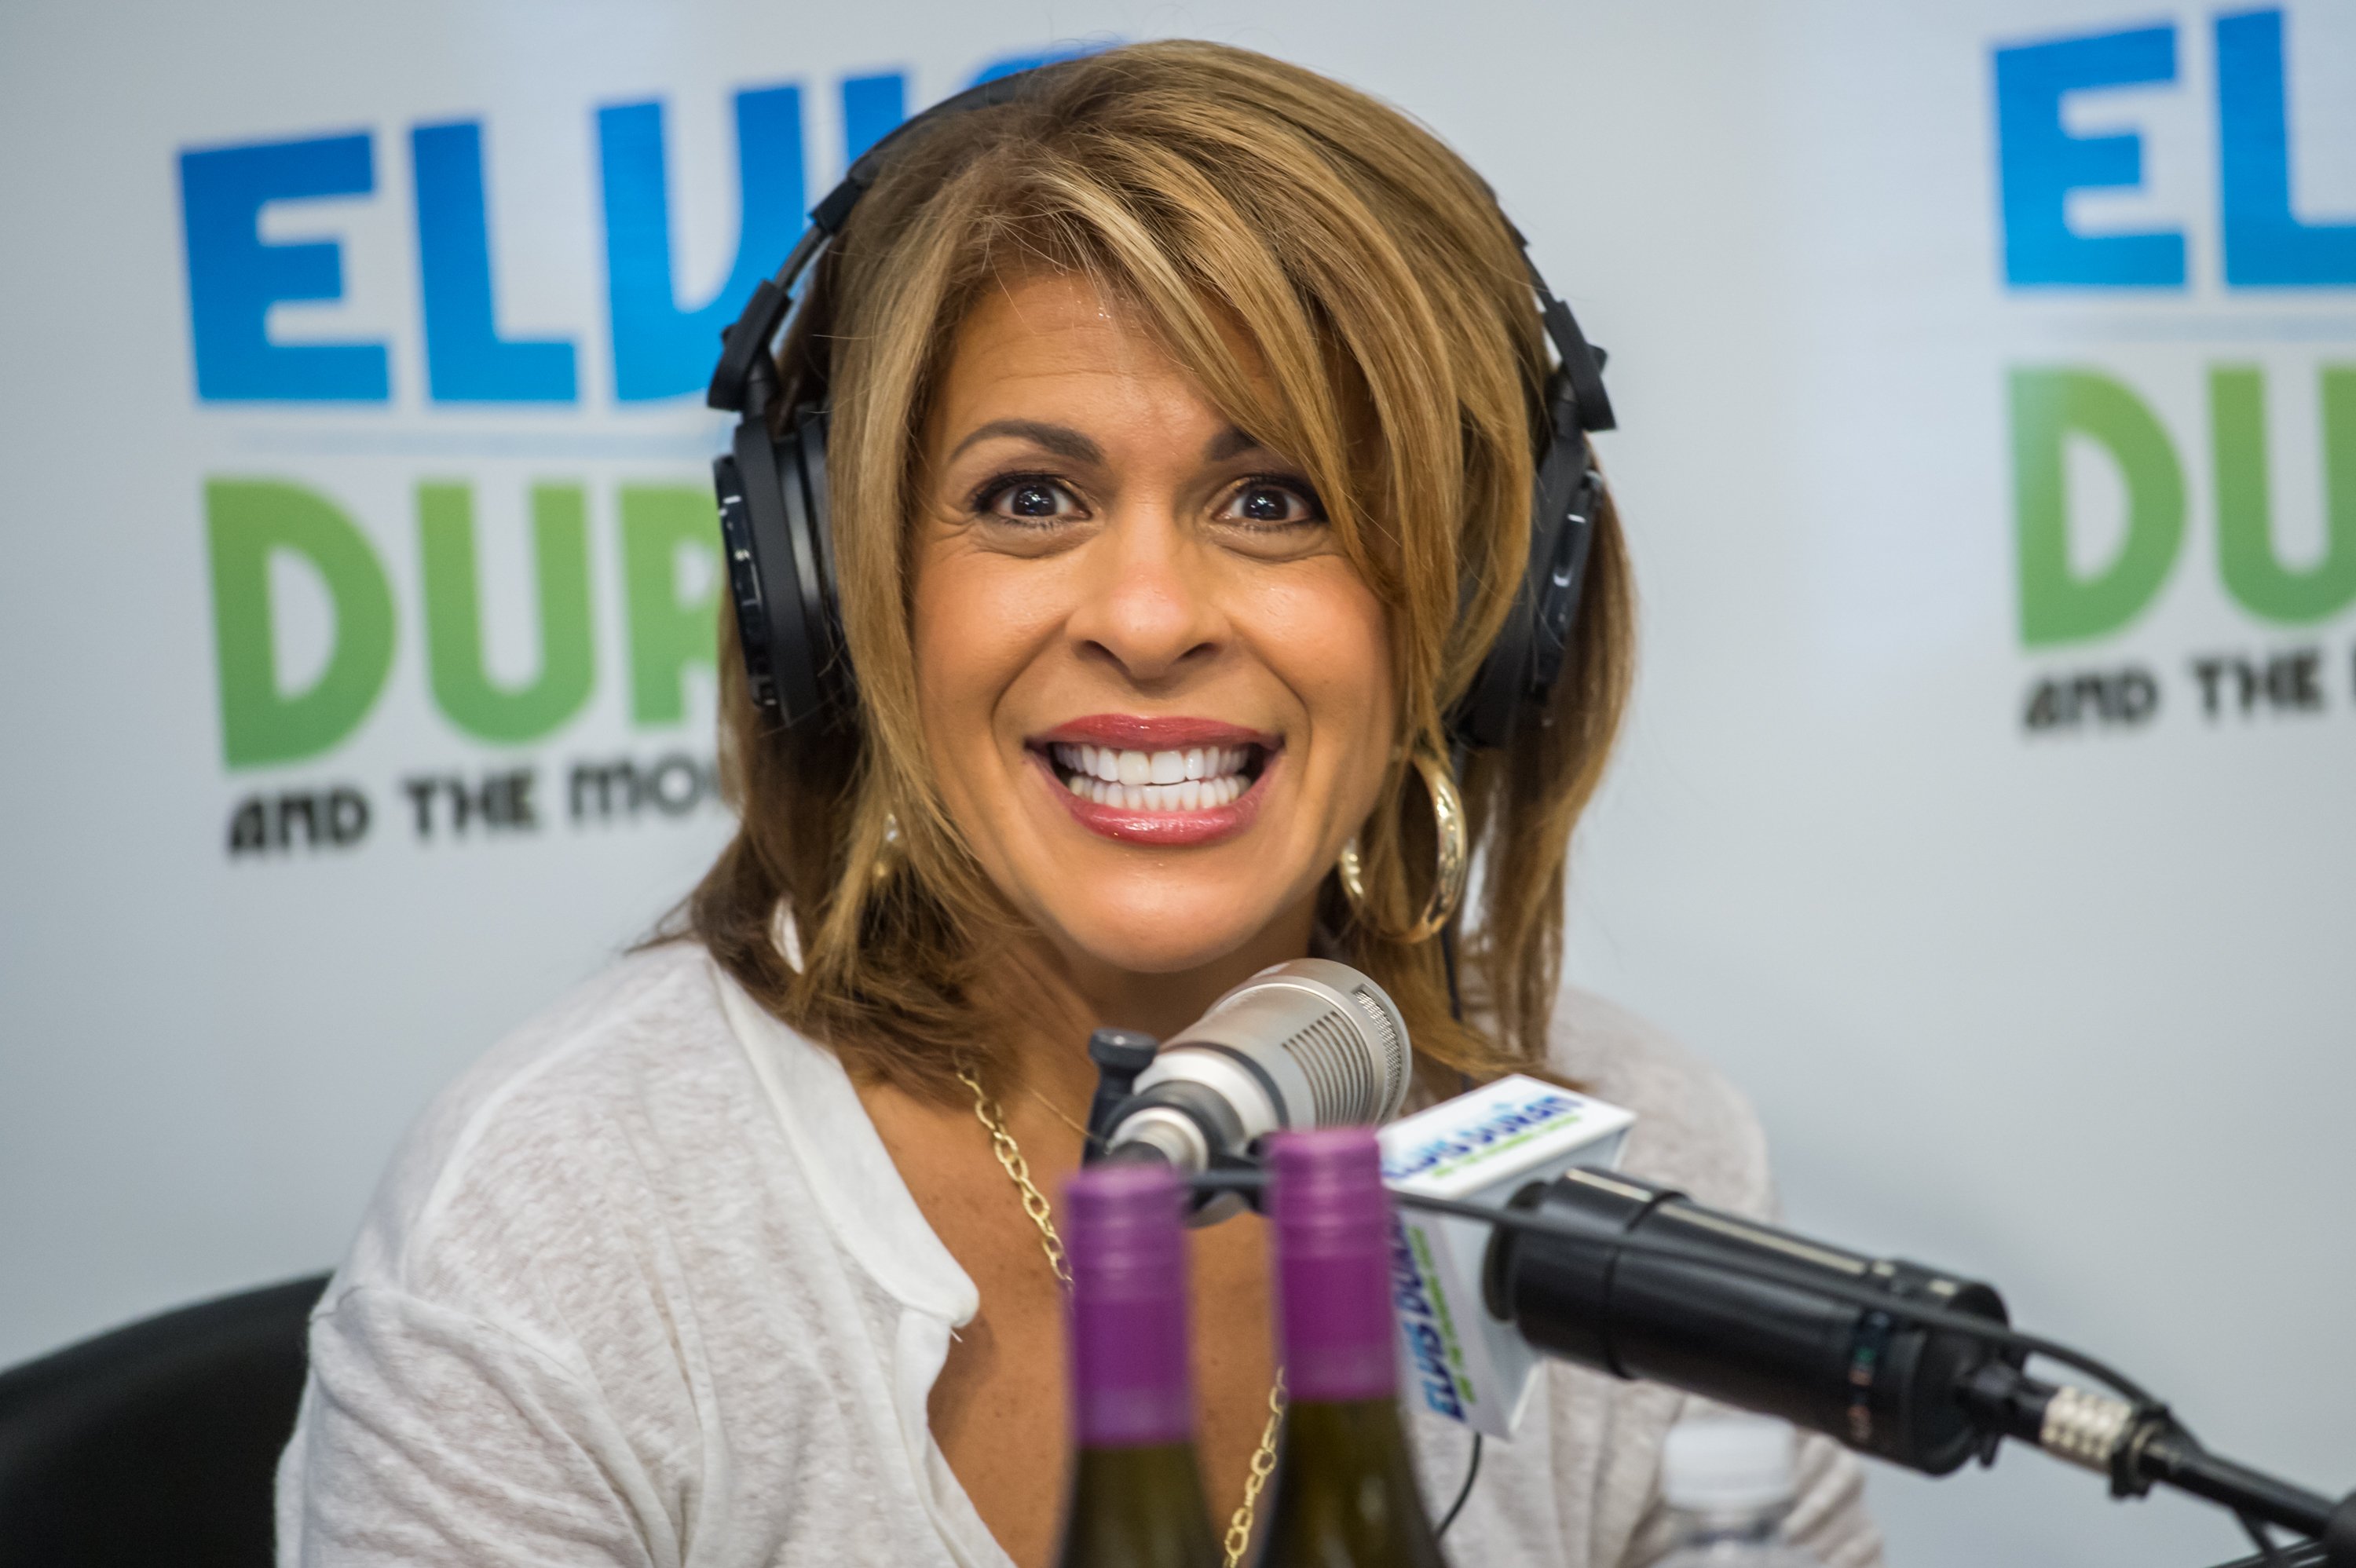 TV host Hoda Kotb during her 2015 morning show in a studio in New York City. | Photo: Getty Images